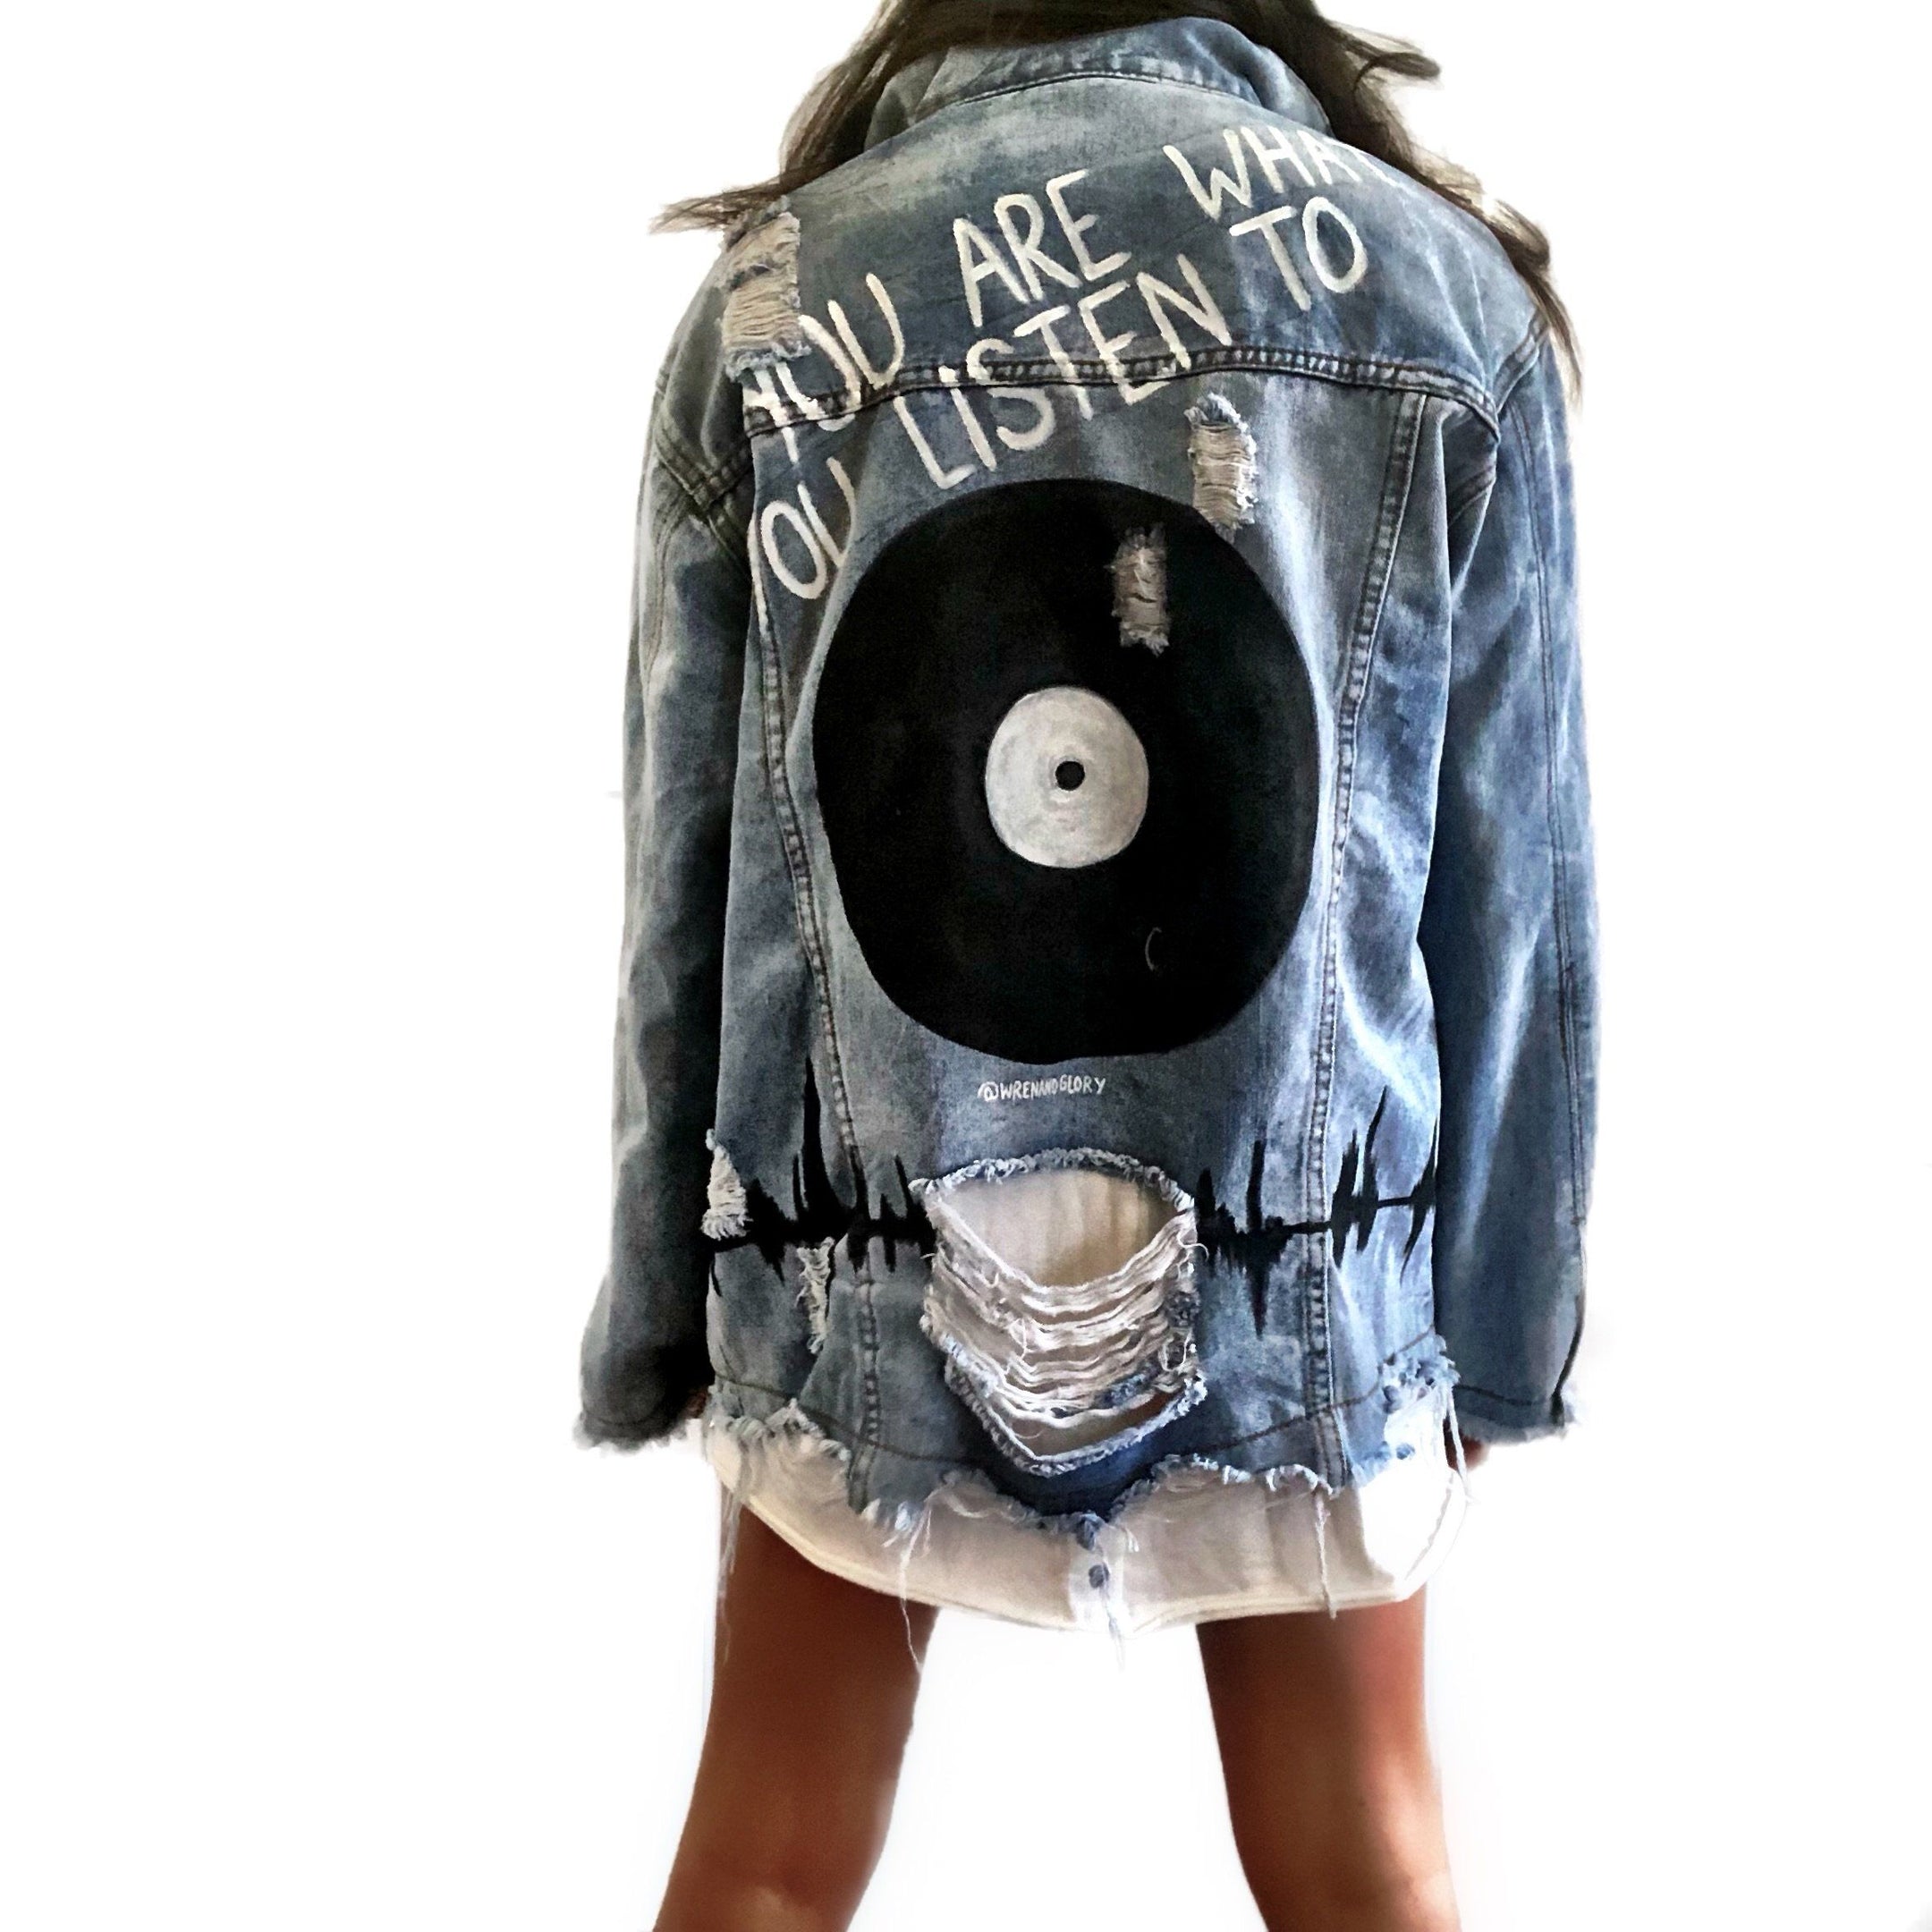 Buy WITH THE BAND' DENIM JACKET by Wren + Glory